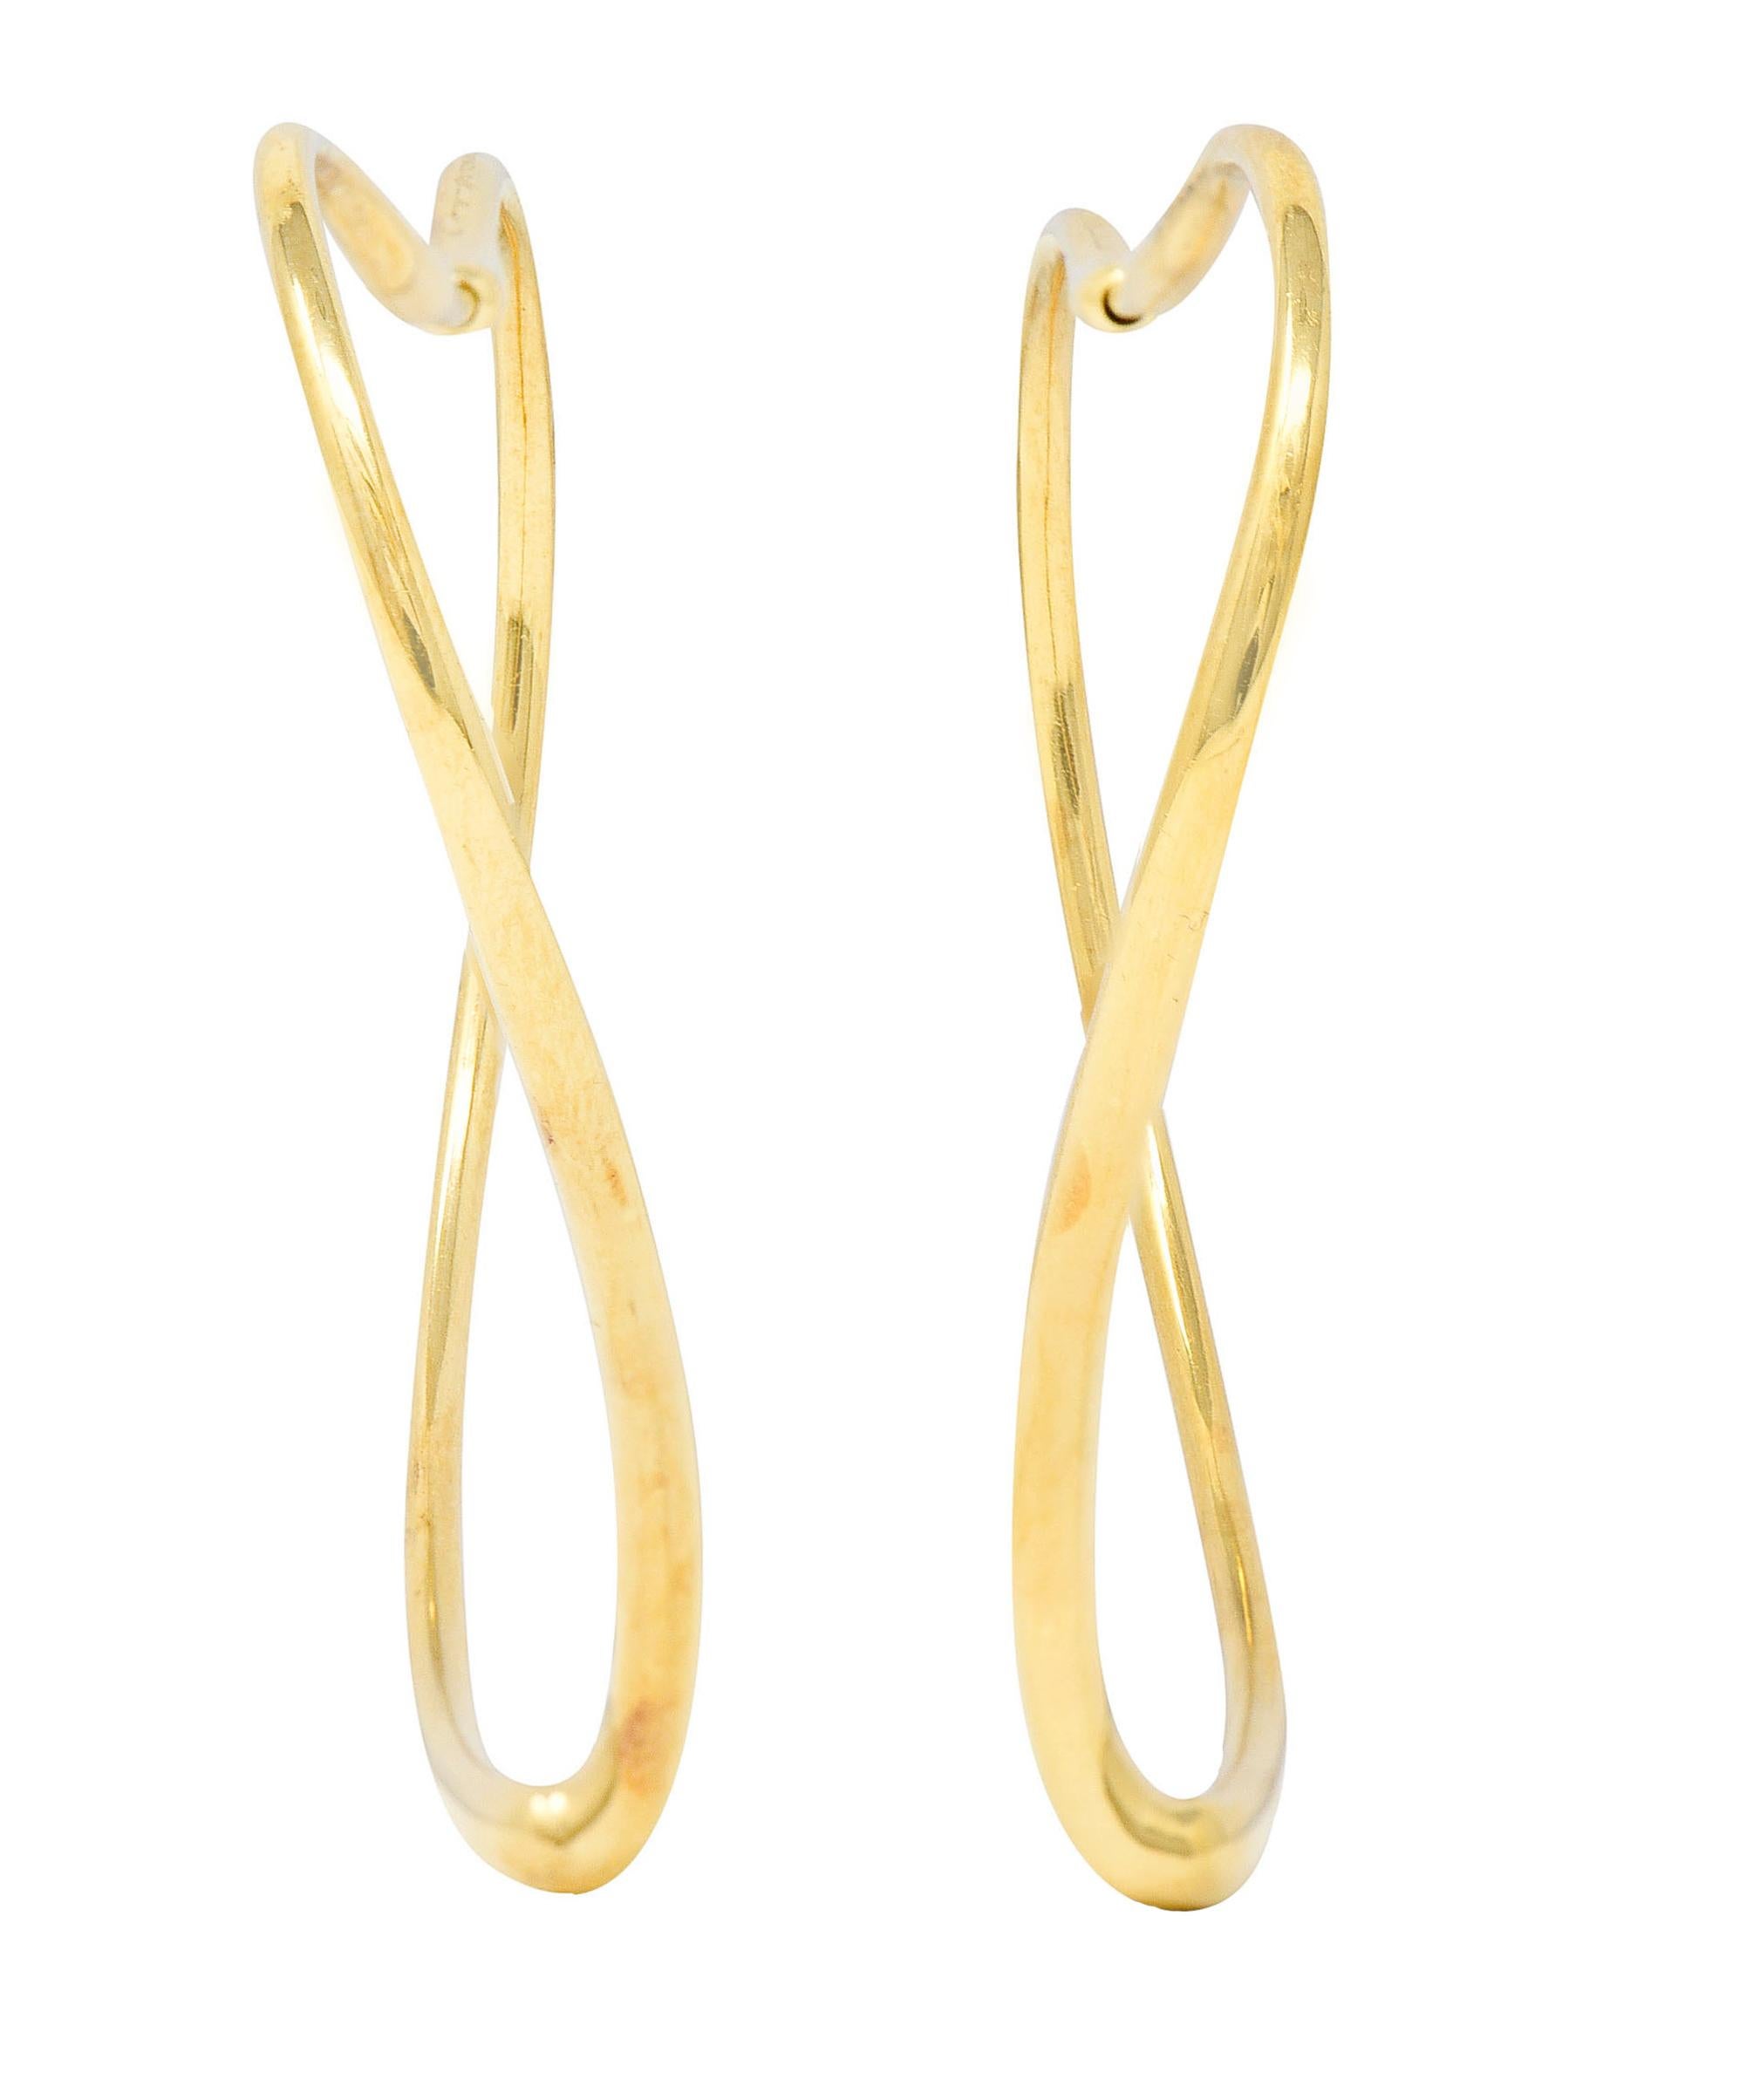 Hoop style earrings are organically shaped as a stylized open heart motif

With broad shoulders fancifully torqued to echo a heart shape

Completed by concealed posts

Stamped 750 for 18 karat gold

Fully signed Tiffany & Co. Elsa Peretti

From the